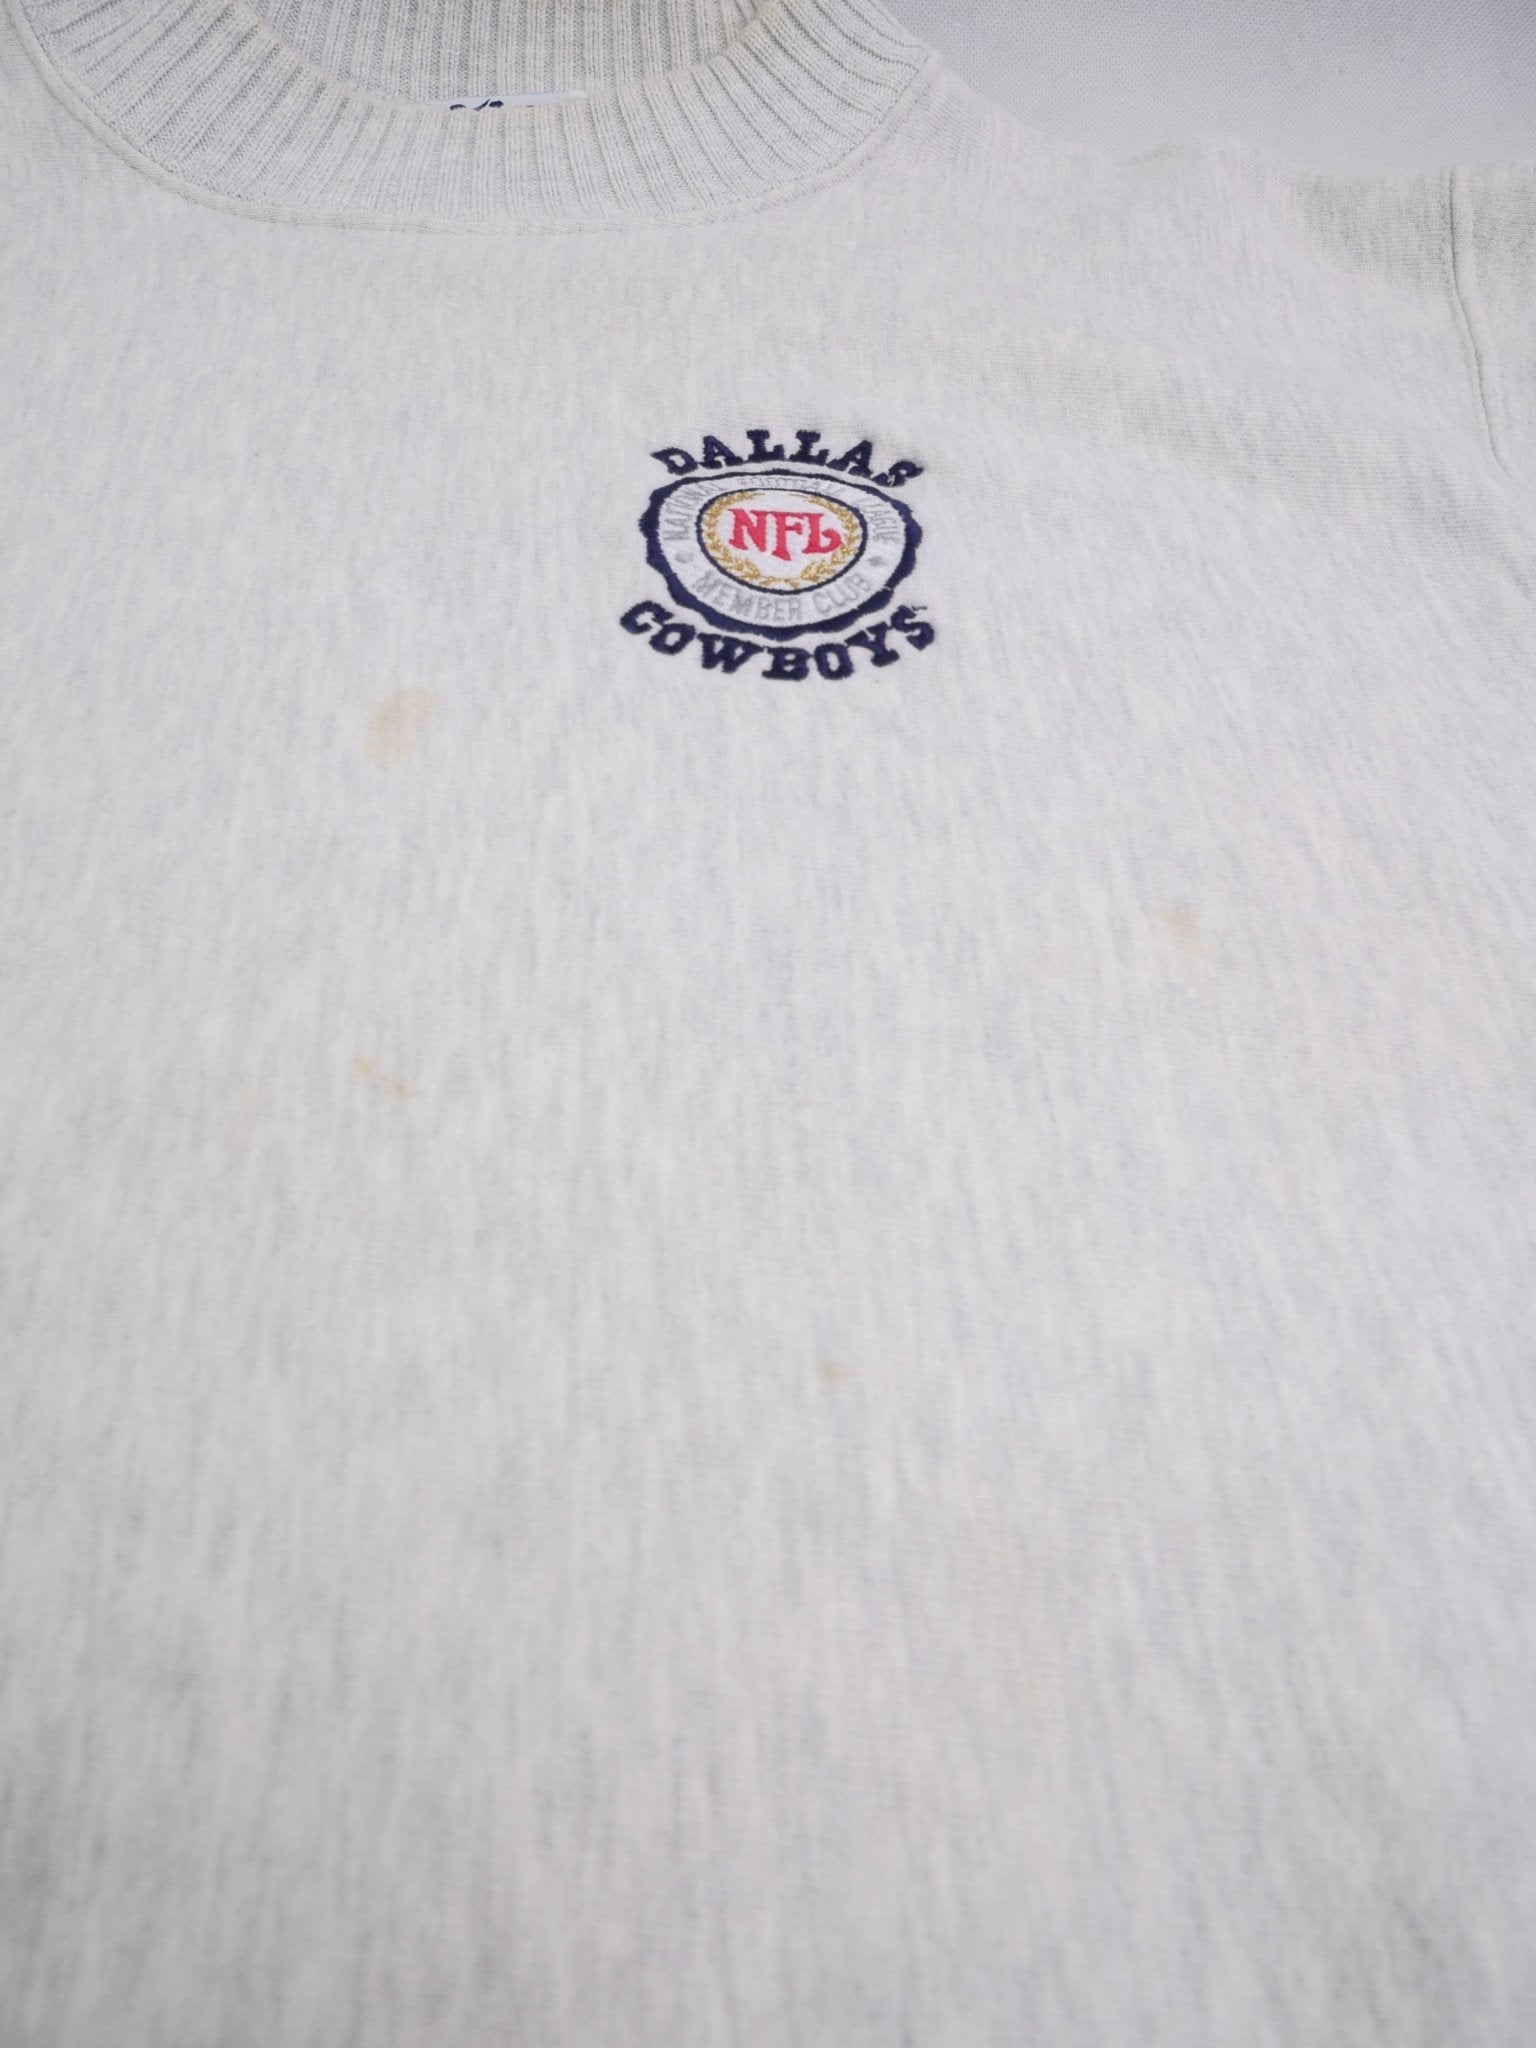 lee NFL 'Dallas Cowboys' embroidered Logo grey Sweater - Peeces